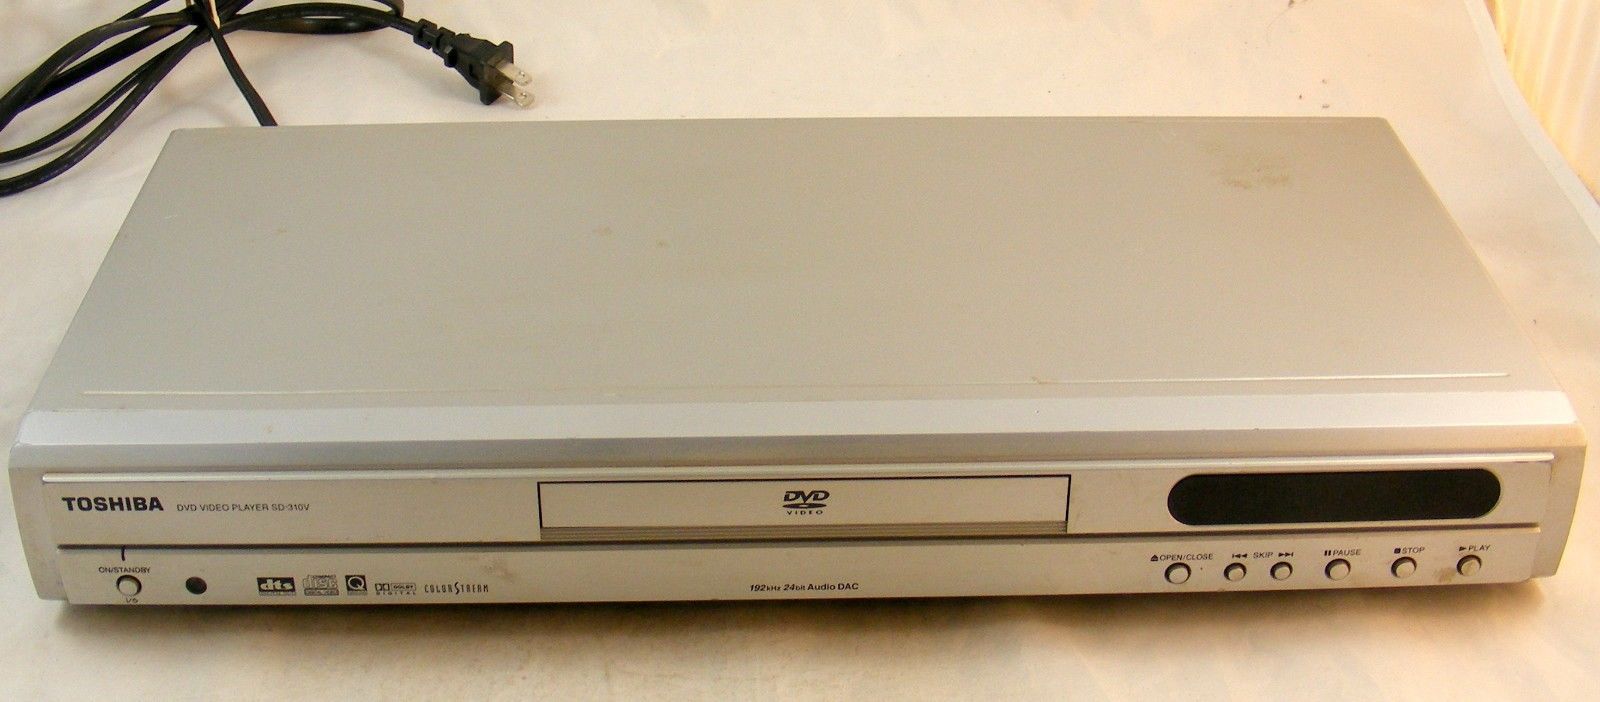 Primary image for Toshiba DVD Player SD-310VU - Good Condition - Works Great